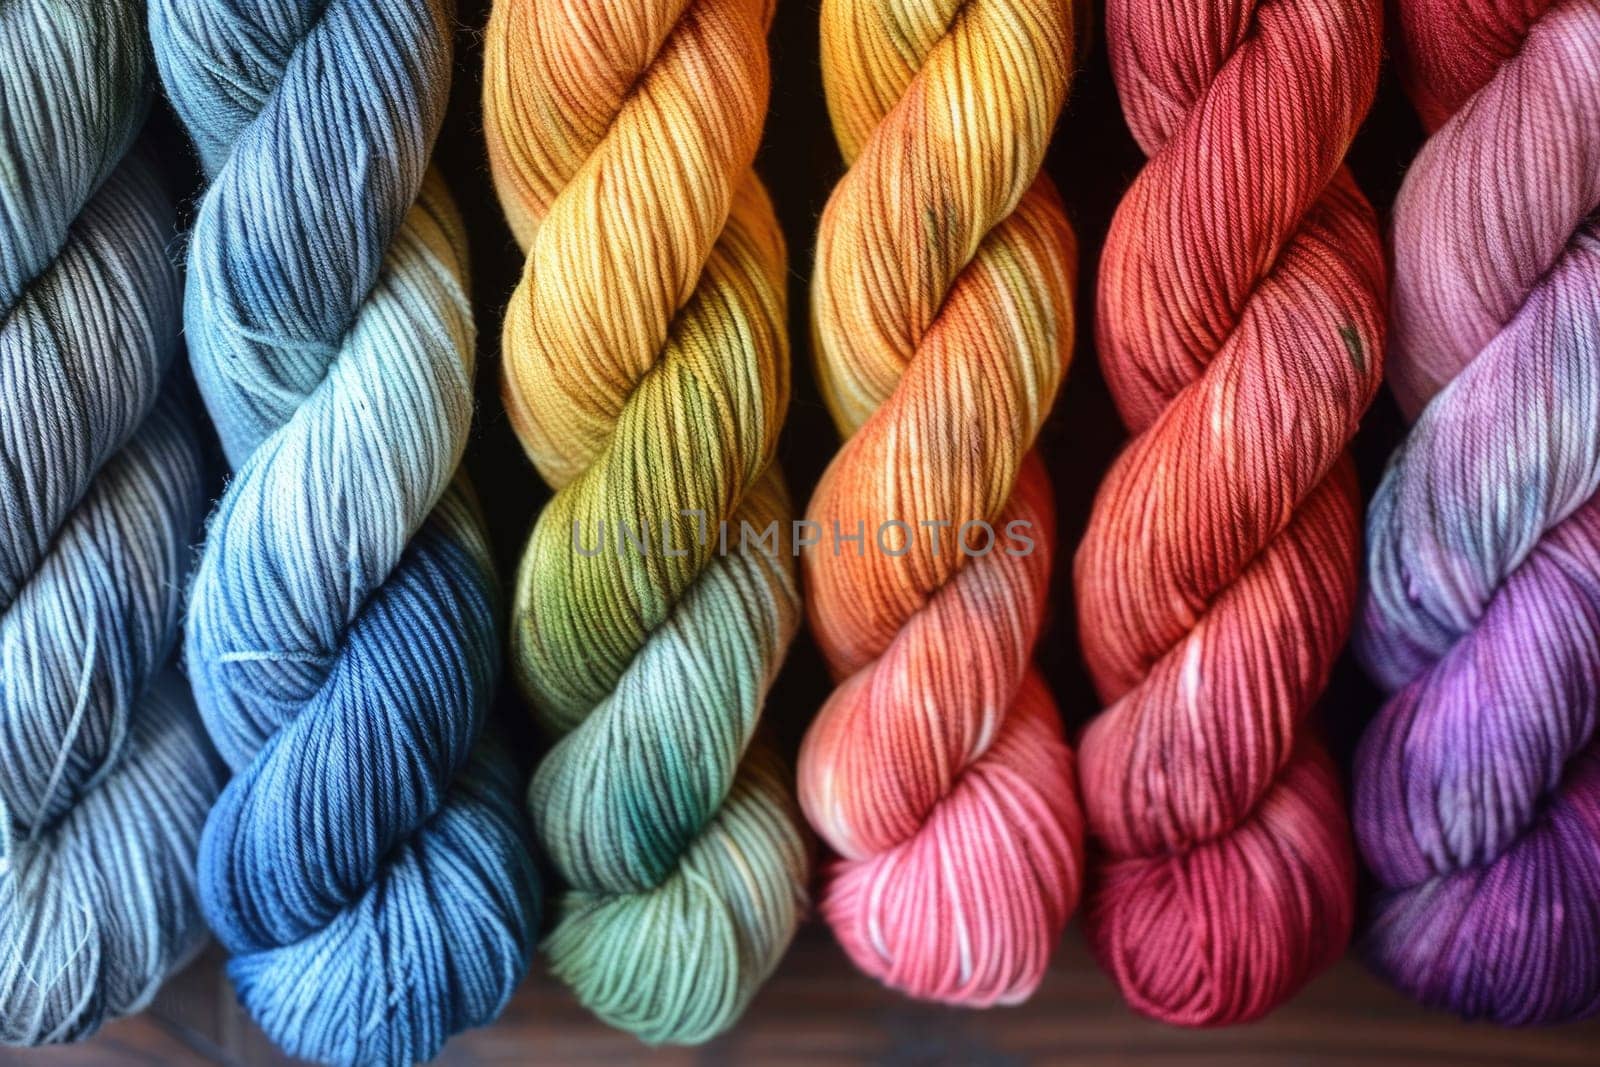 Close-up view of a diverse range of yarn skeins in different colors neatly arranged in a row.